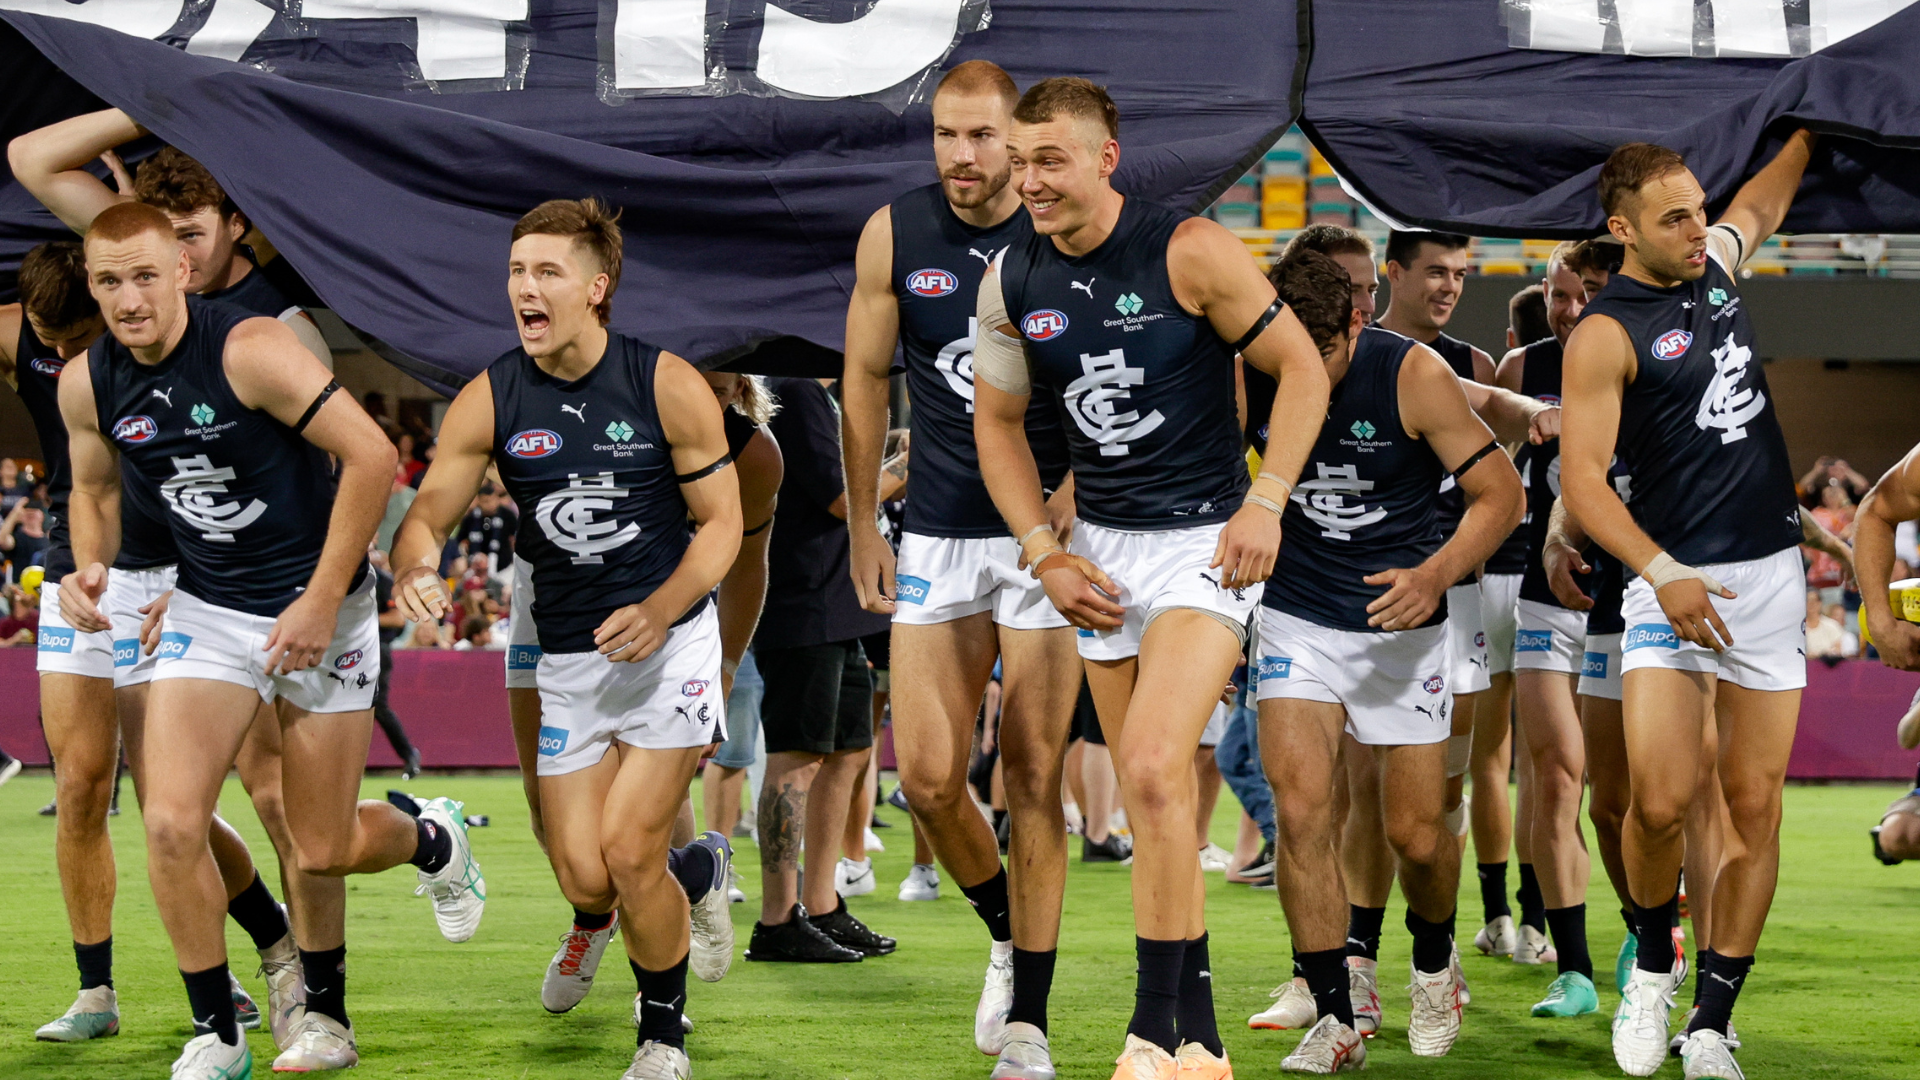 How to watch today’s Carlton Blues vs Adelaide Crows AFL match: Livestream, TV channel, and start time | Goal.com Australia